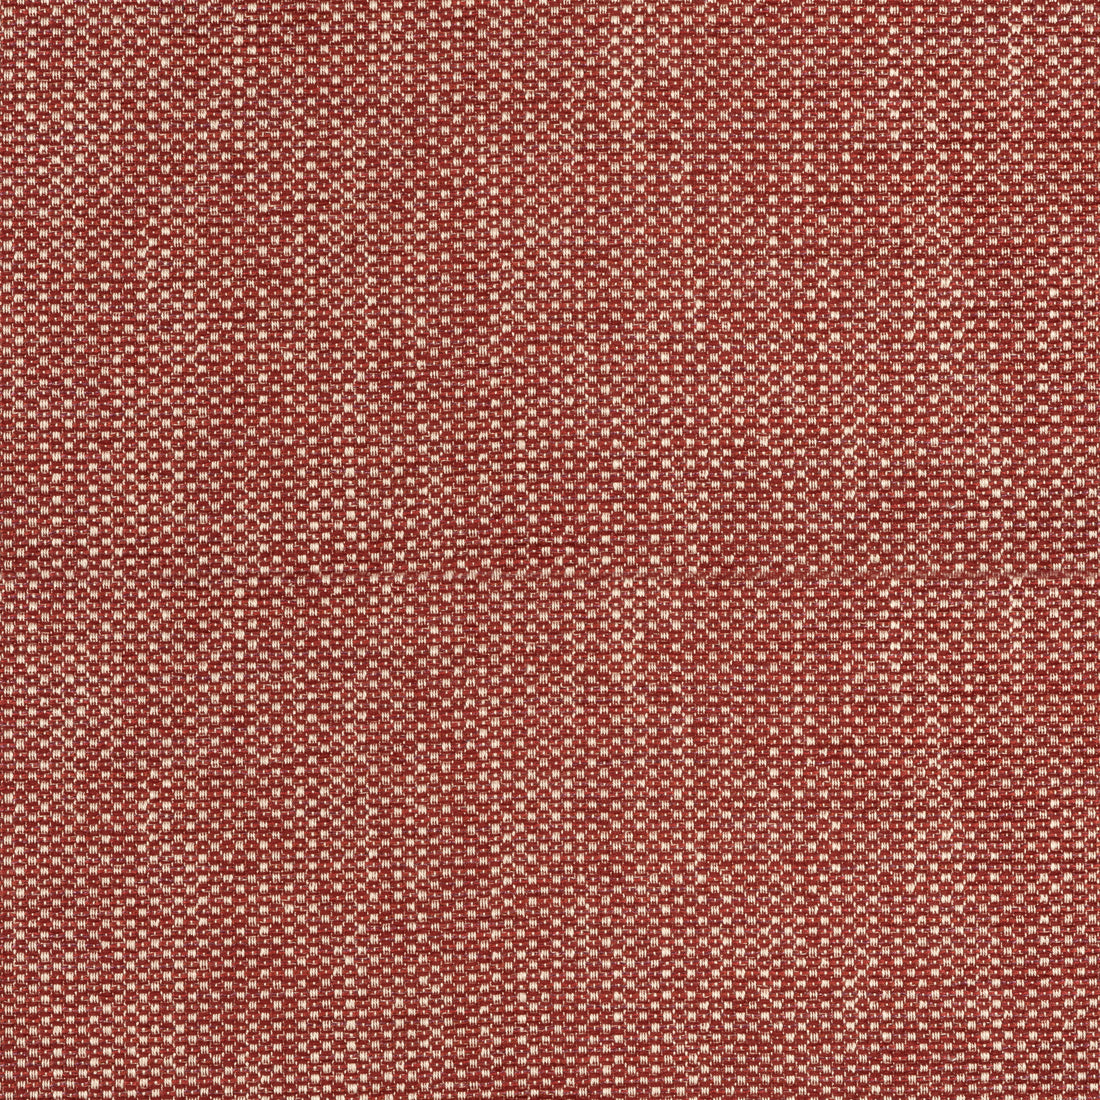 Cascade fabric in sangria color - pattern number W75261 - by Thibaut in the Elements collection